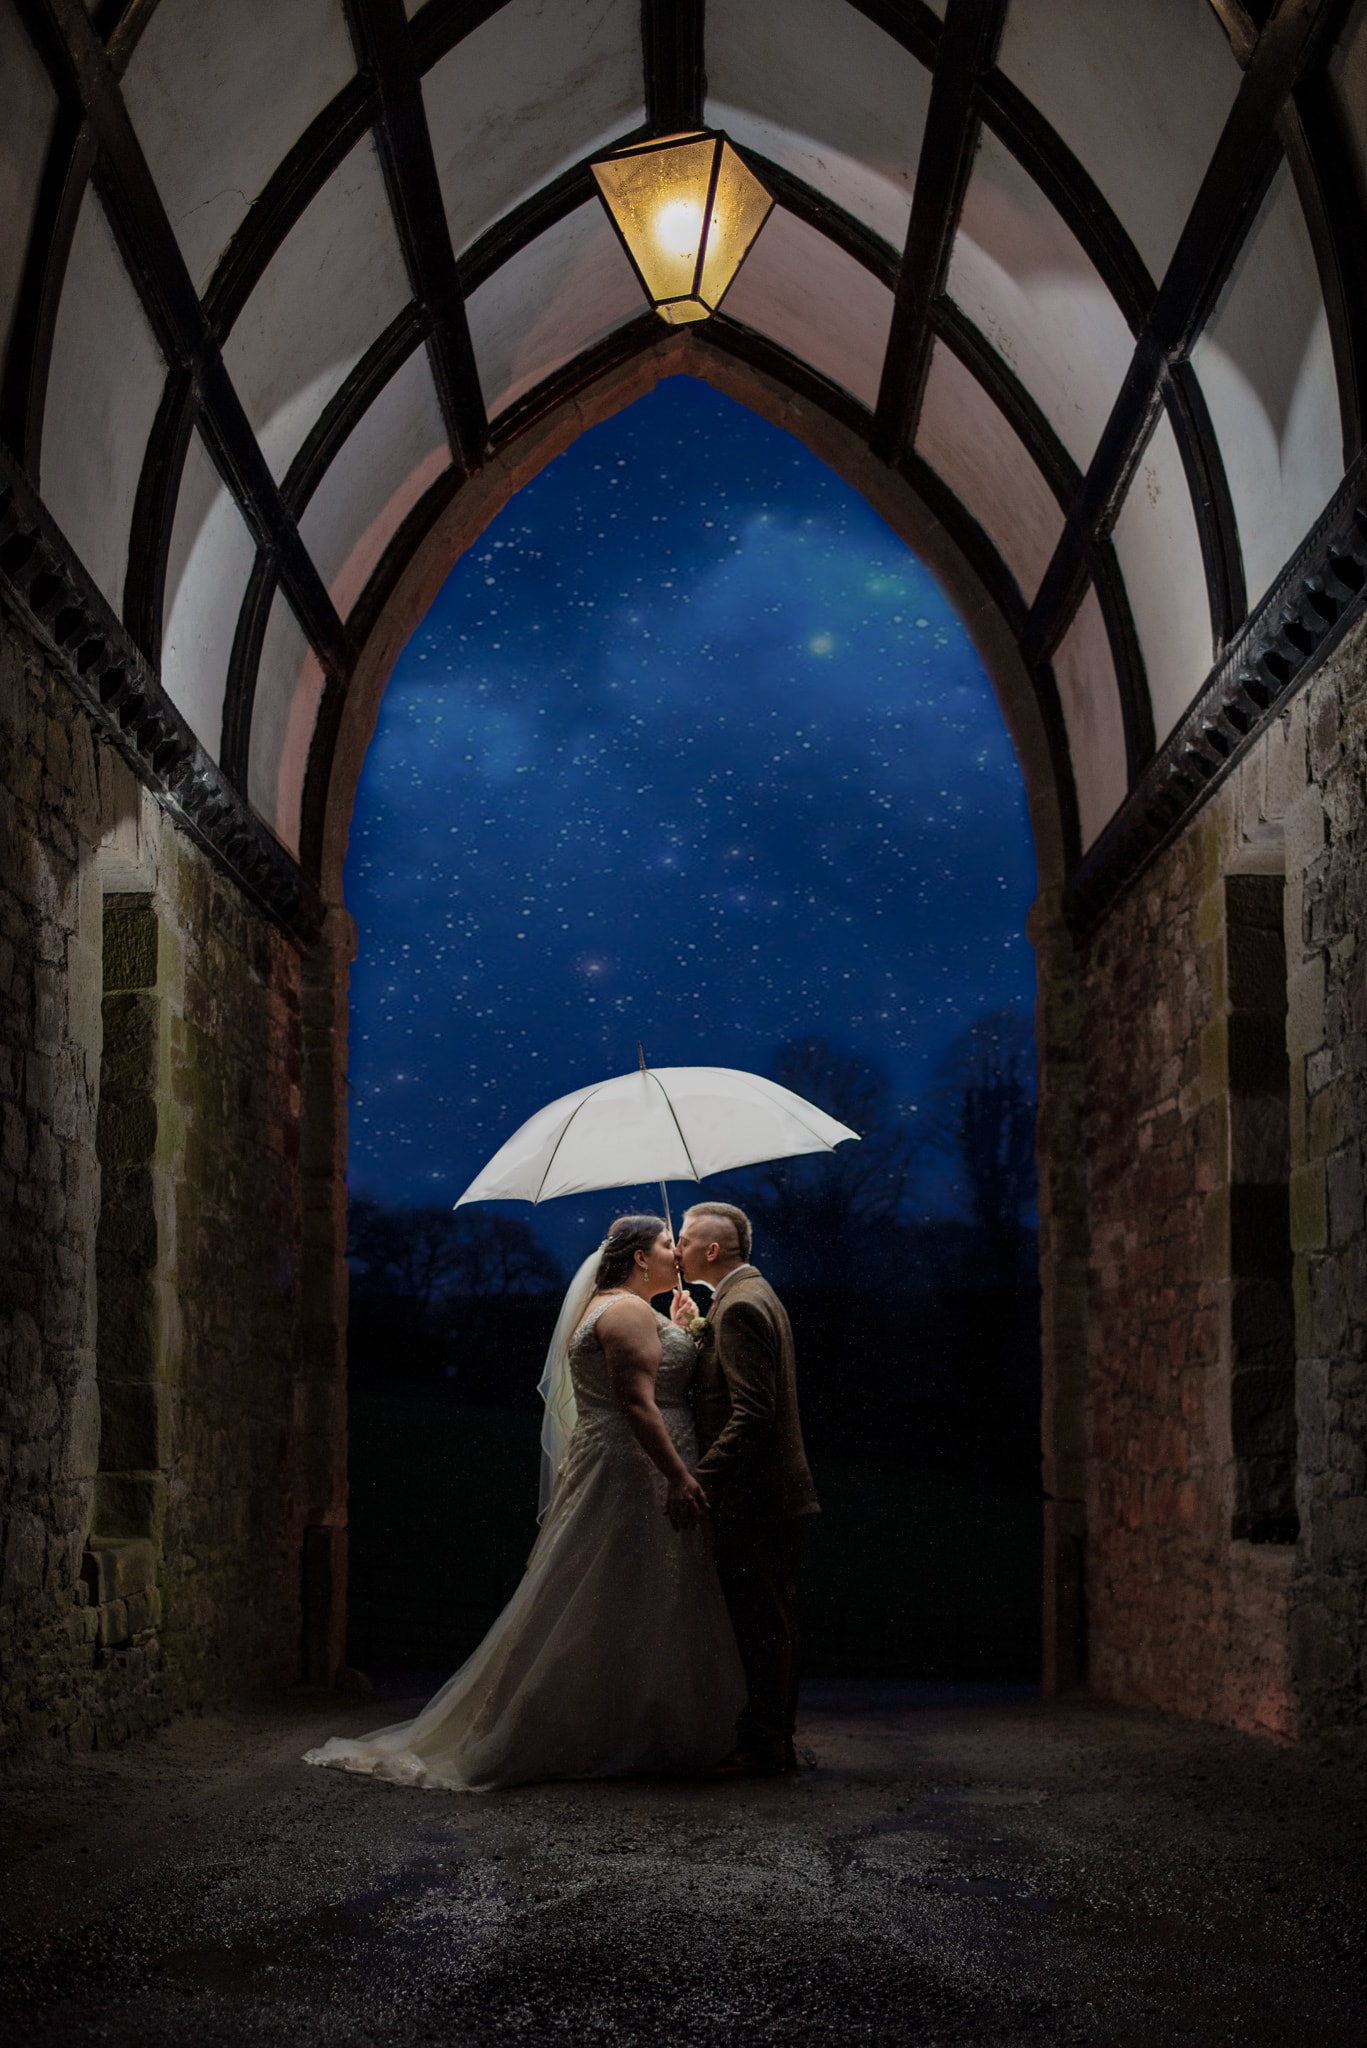 Under the arch shot at Clearwell castle. A flash lights up the archway in the dar as a couple kiss under a white umbrella.